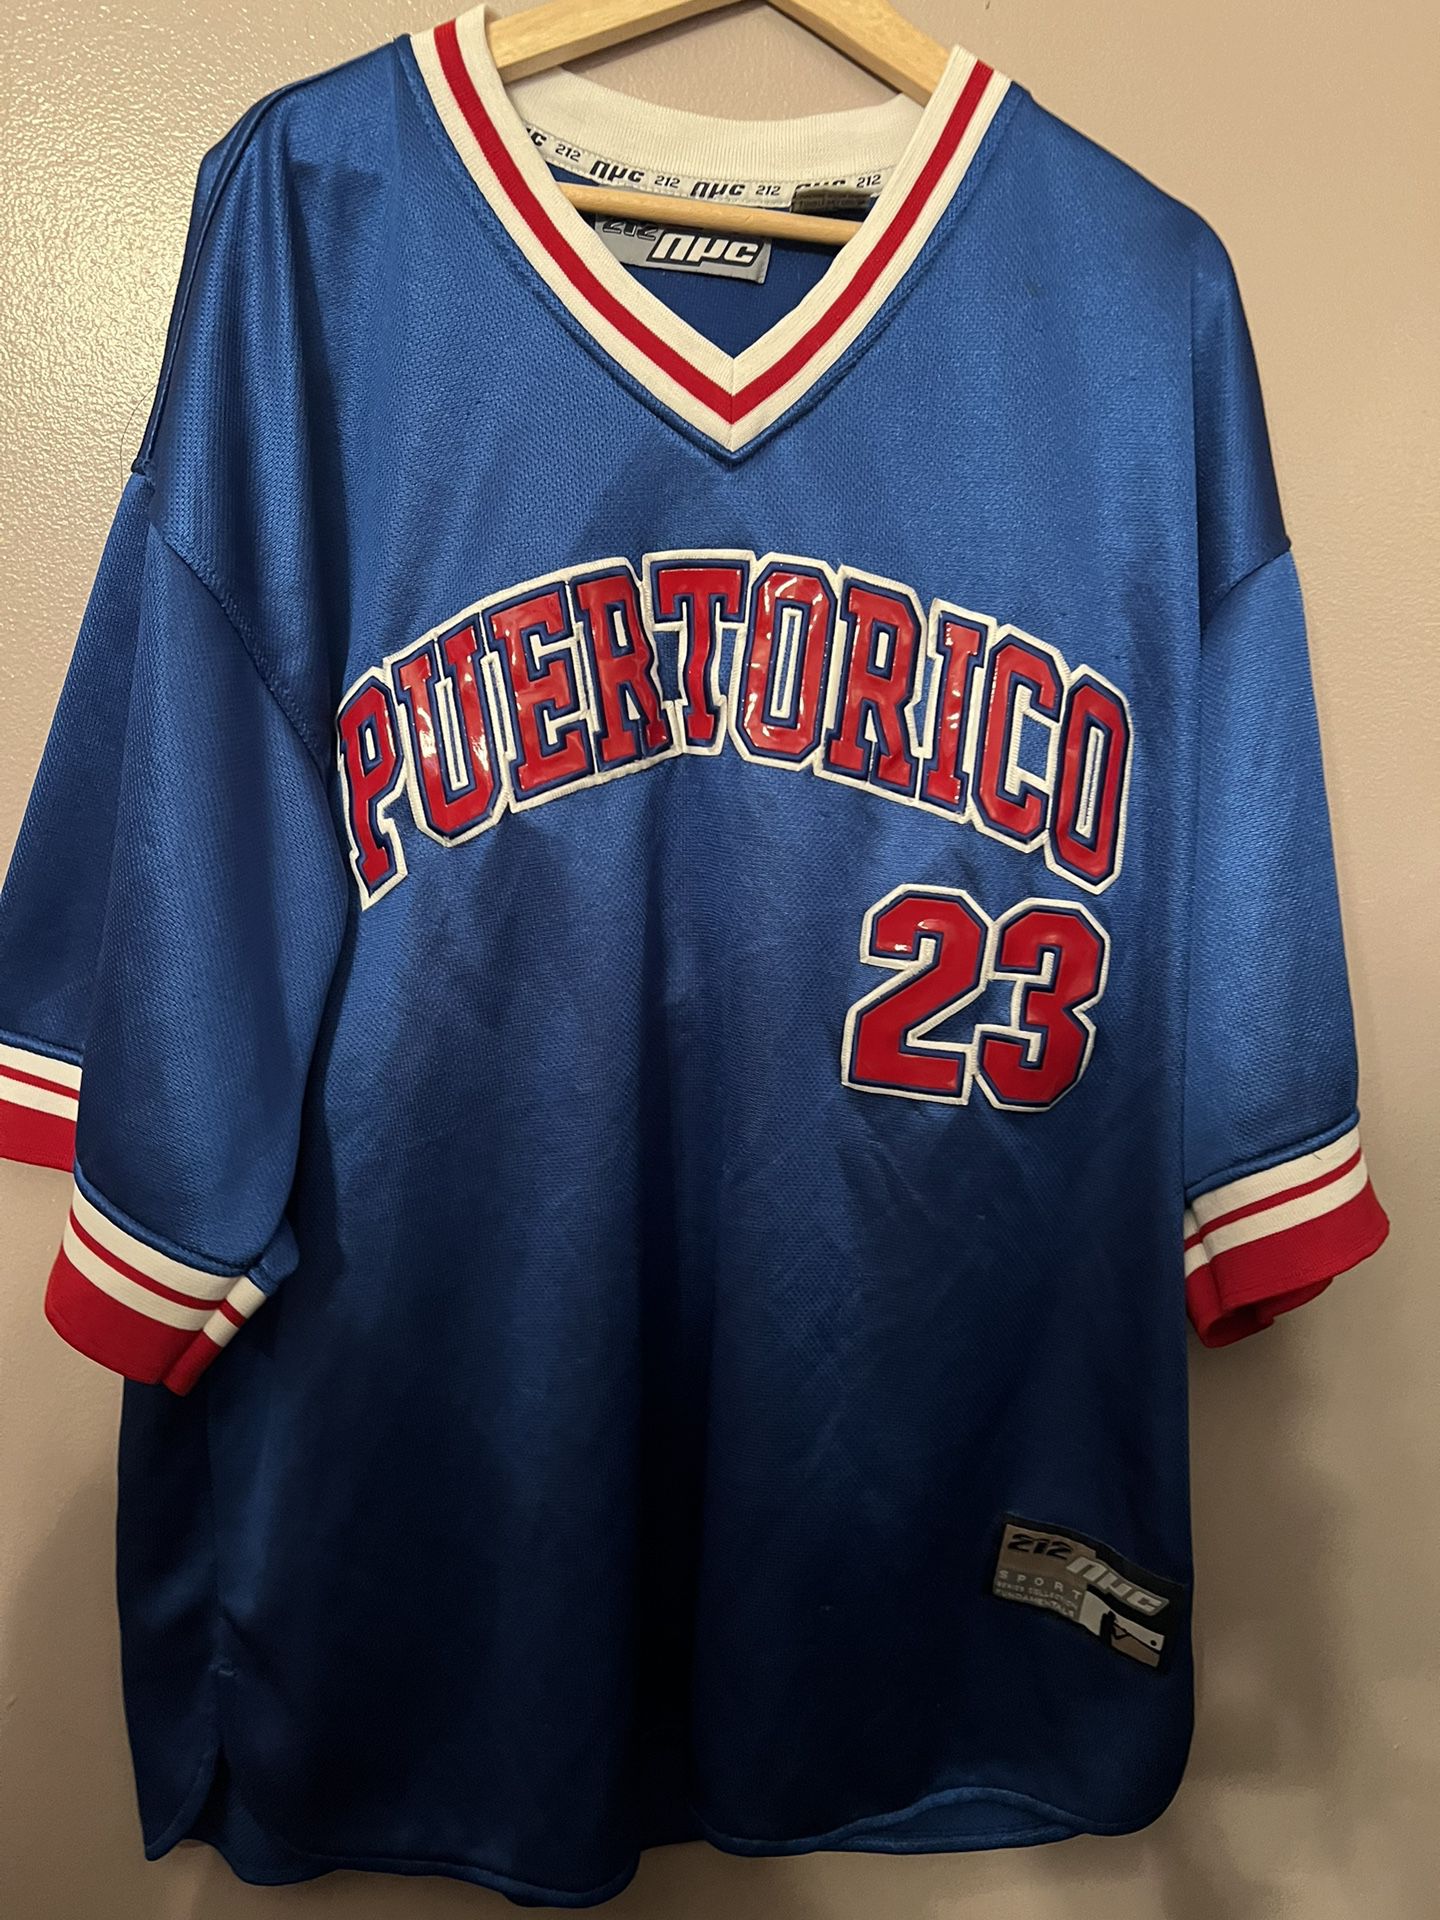 Puerto Rico Number 23 Jersey Pre Owned